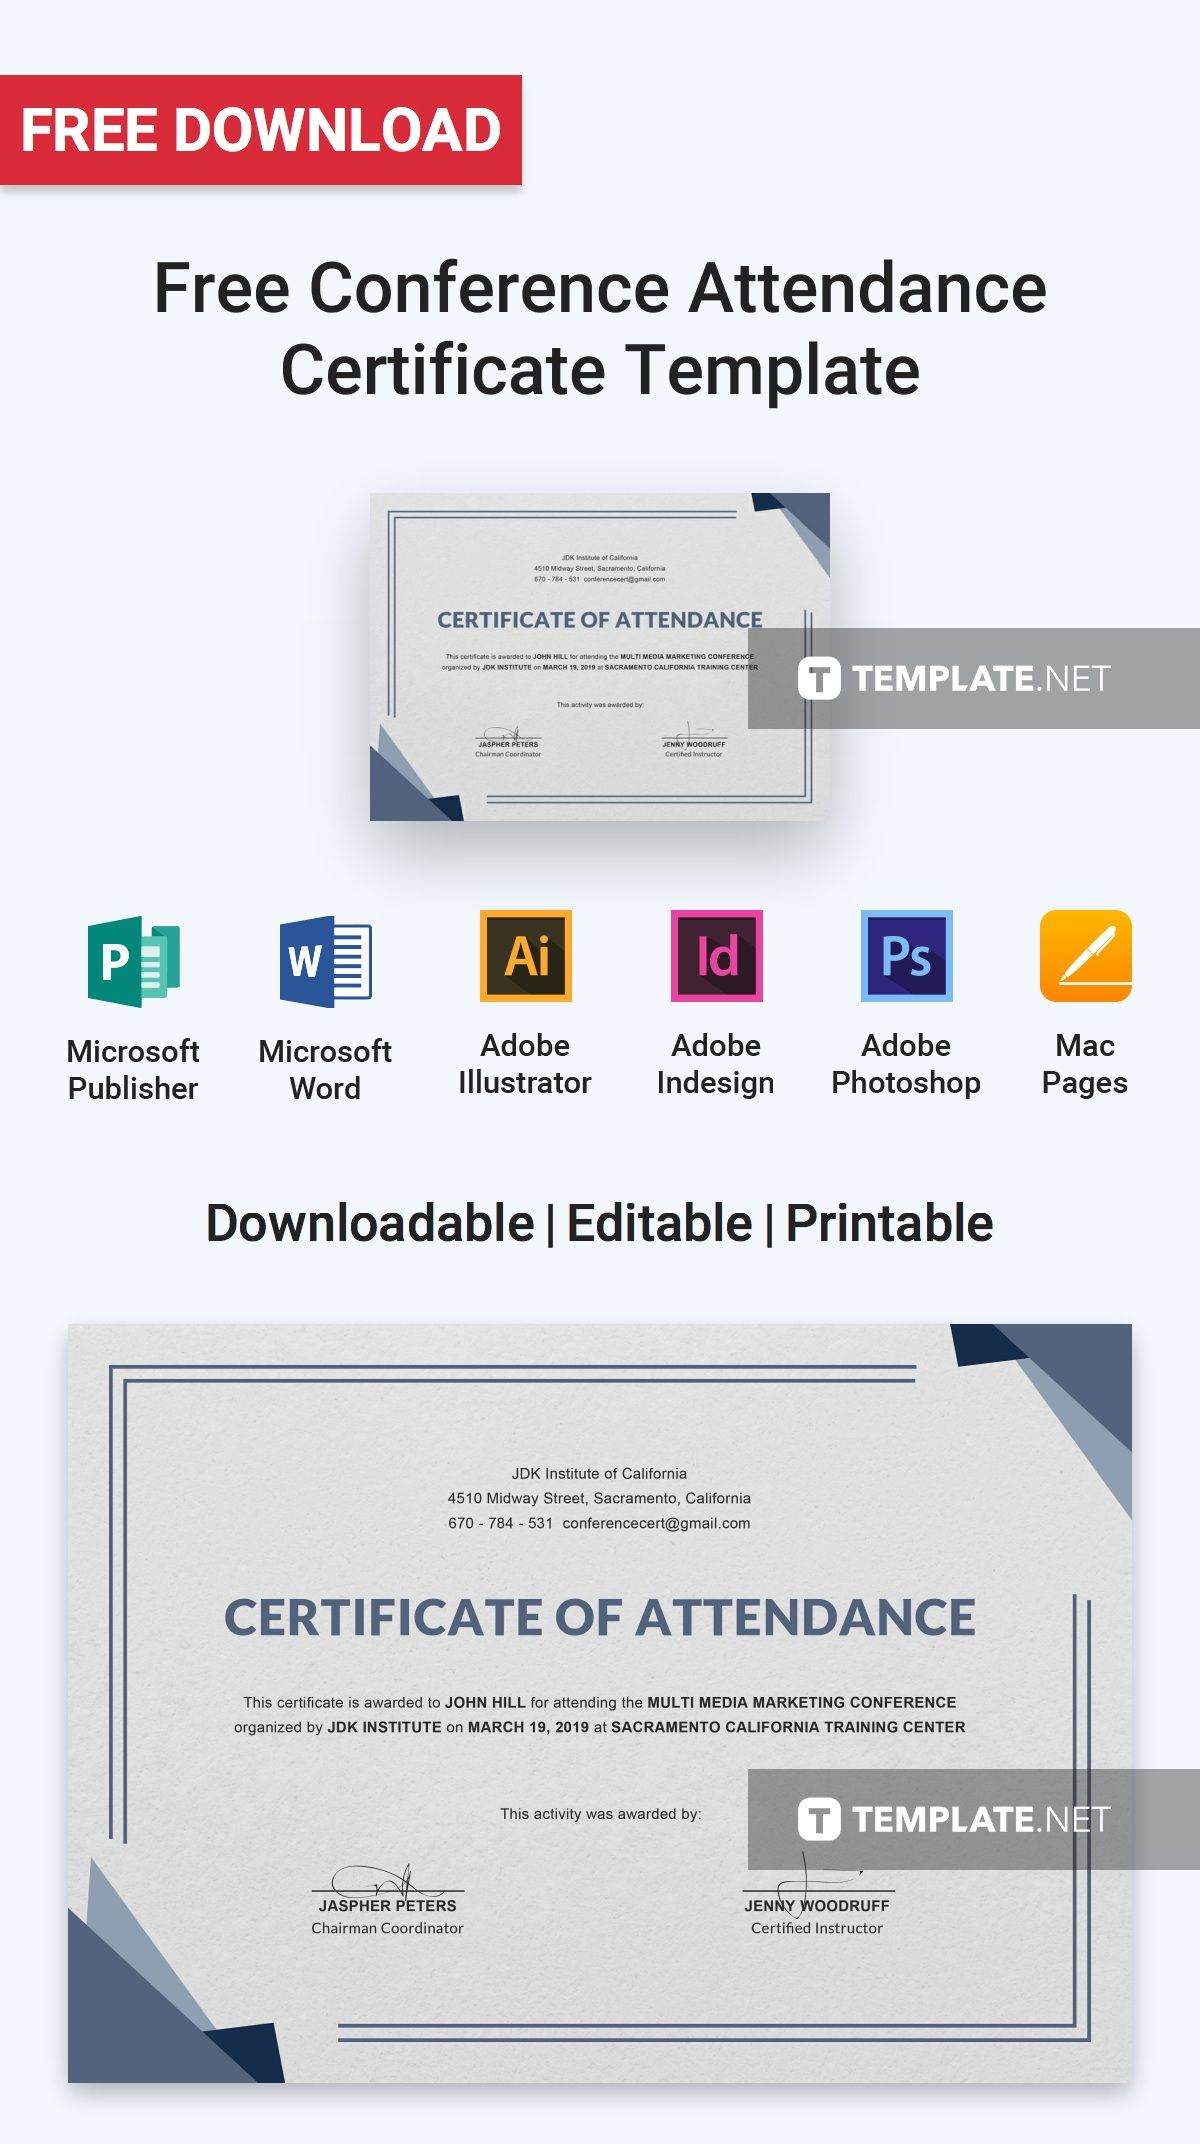 Free Conference Attendance Certificate | Certificate Throughout Certificate Of Attendance Conference Template